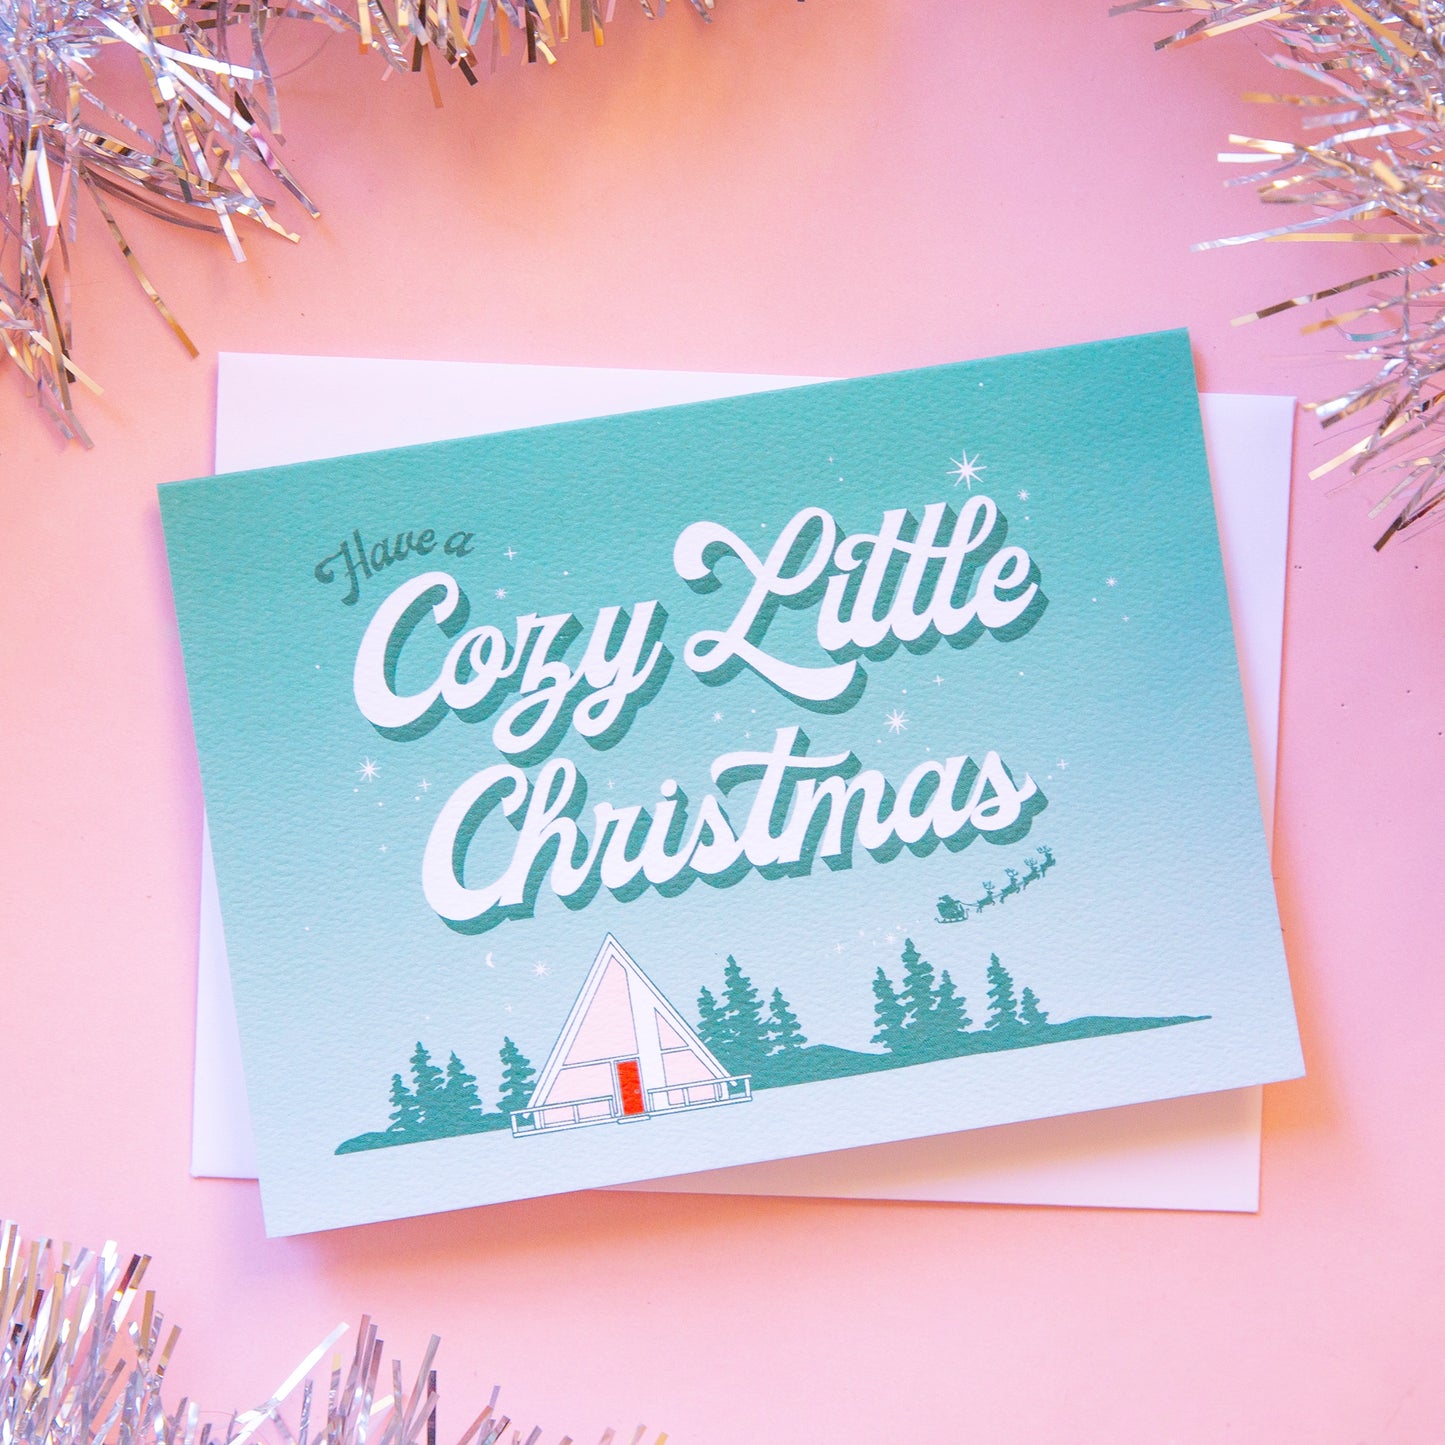 Aqua and white ombre greeting card that reads 'have a cozy little Christmas'. Below the text is a small white tent in a forest scene. A small Santa sleigh and reindeer fly across the sky. The card is accompanied by a white envelope.